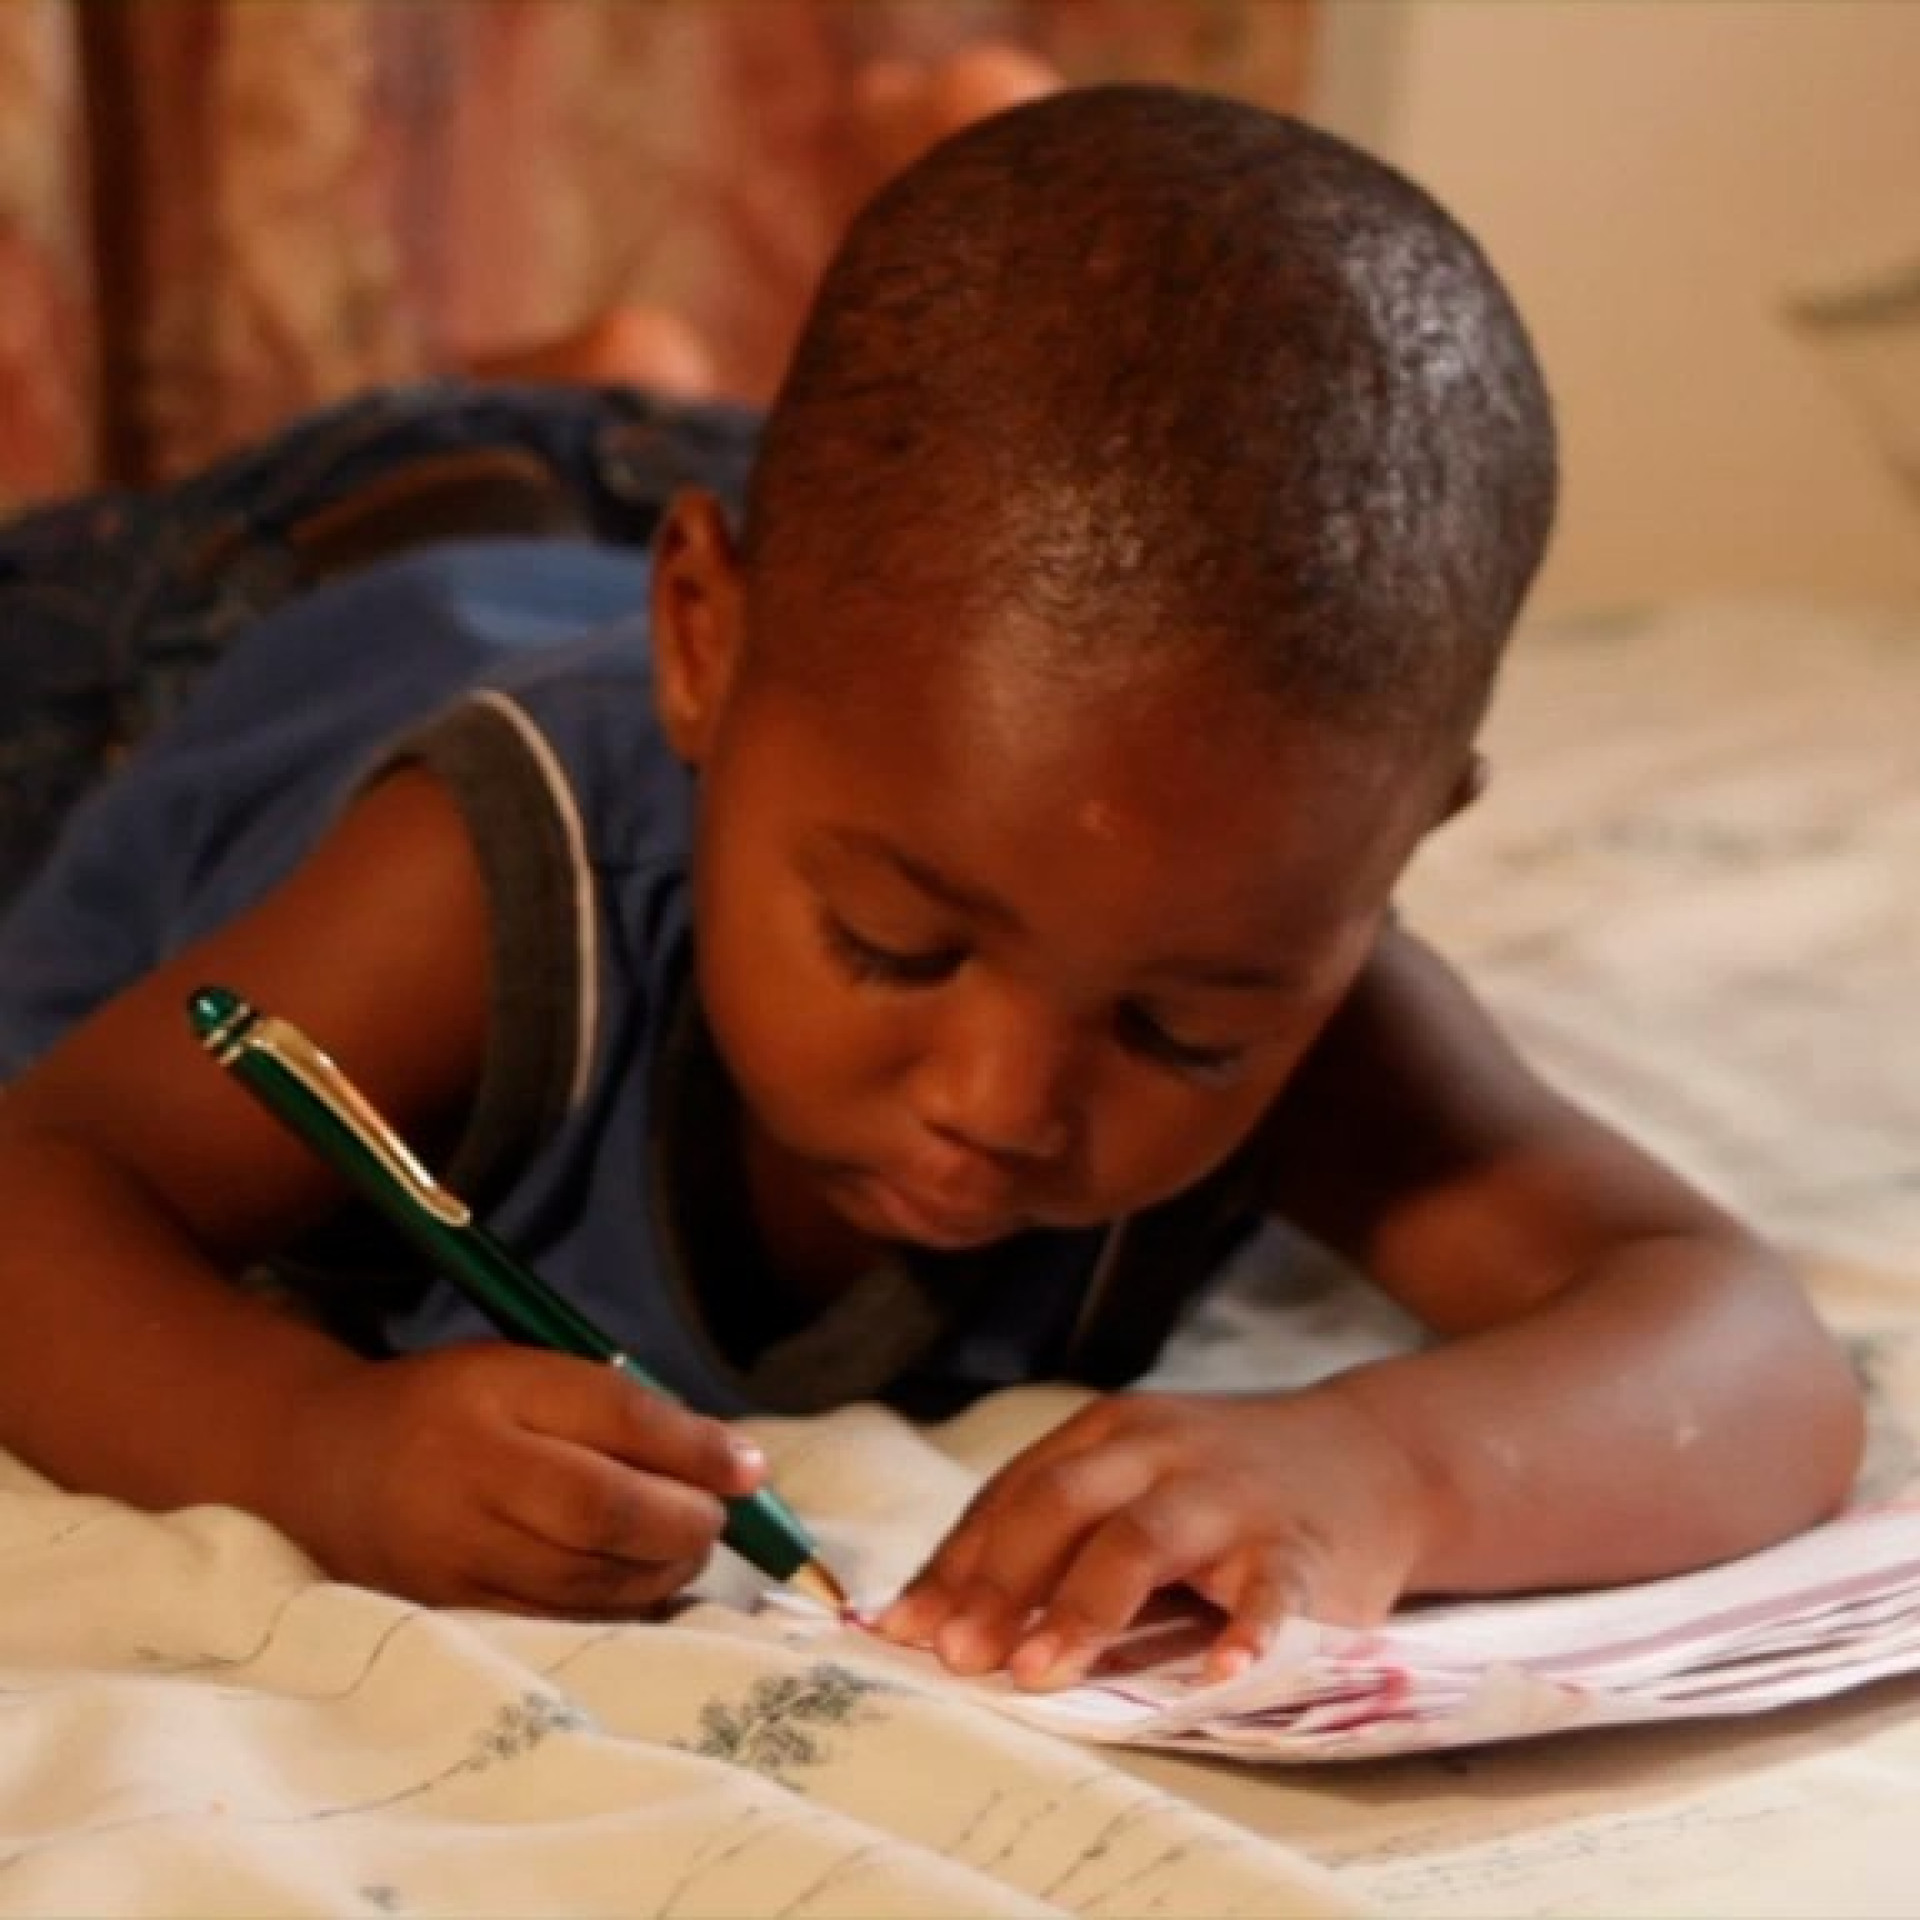 A young child drawing representing DMI's focus on ECD for this project